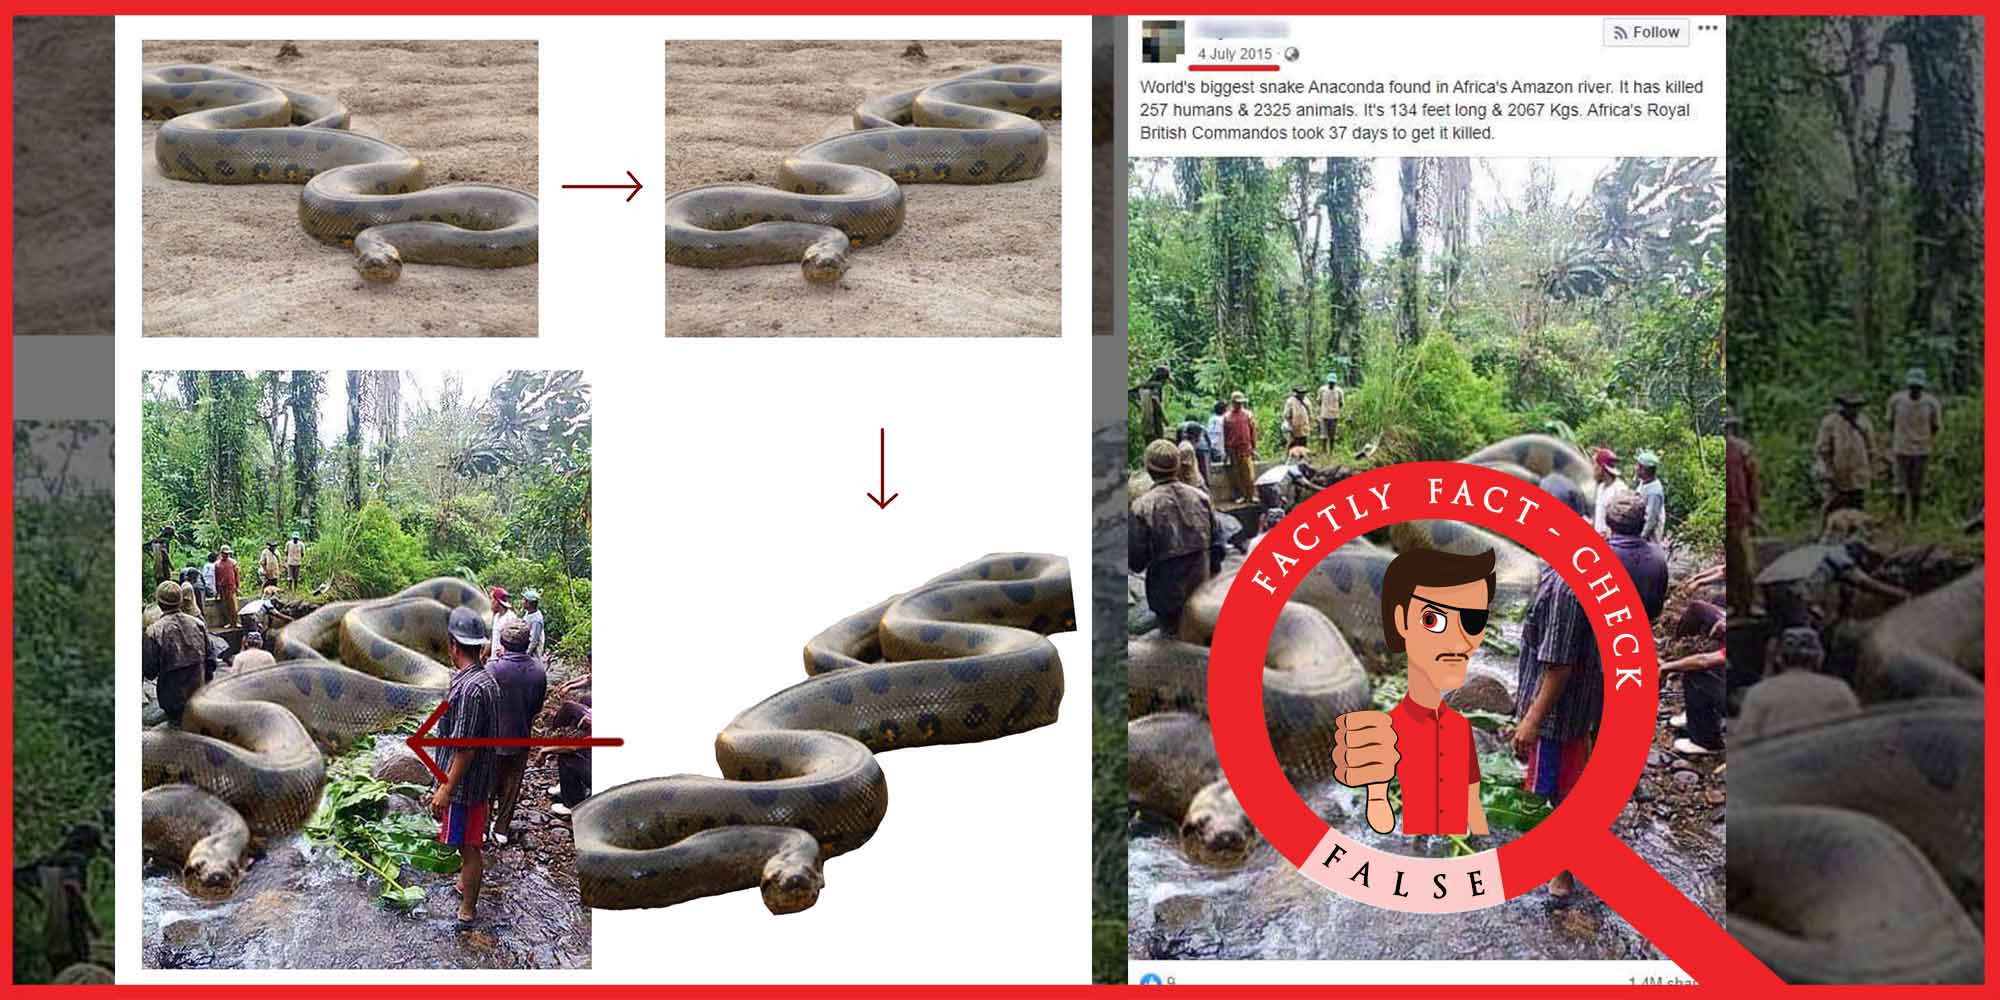 A Photoshopped Image Is Being Shared As That Of The World S Biggest Anaconda Snake Factly